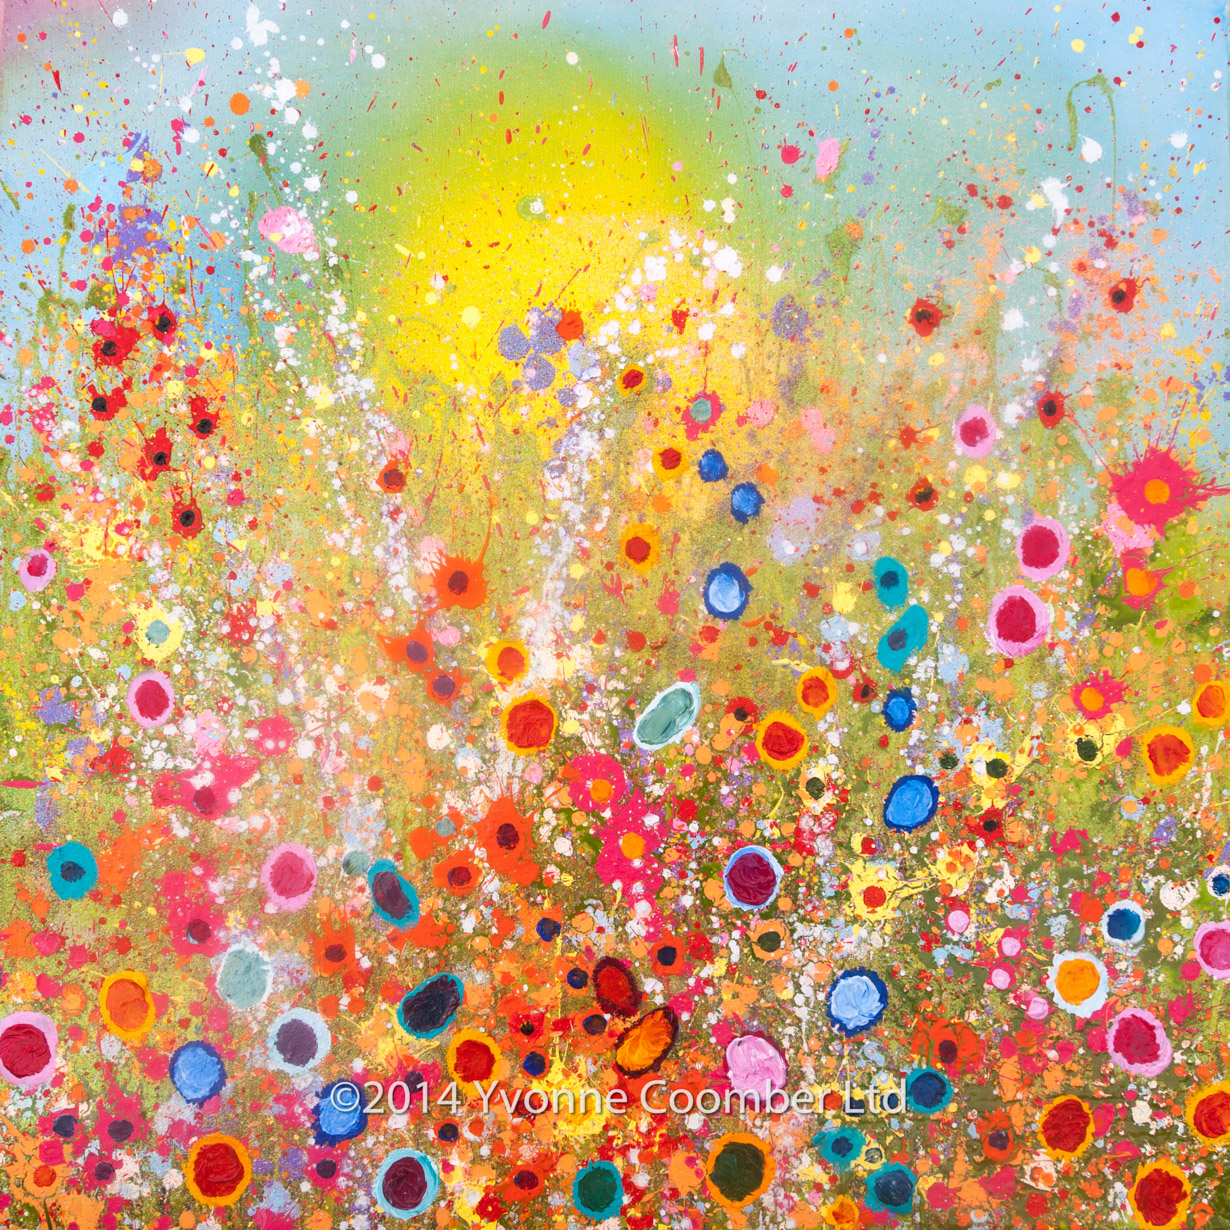 Yvonne Coomber prints at Imagianation Gallery, St Ives, Cornwall